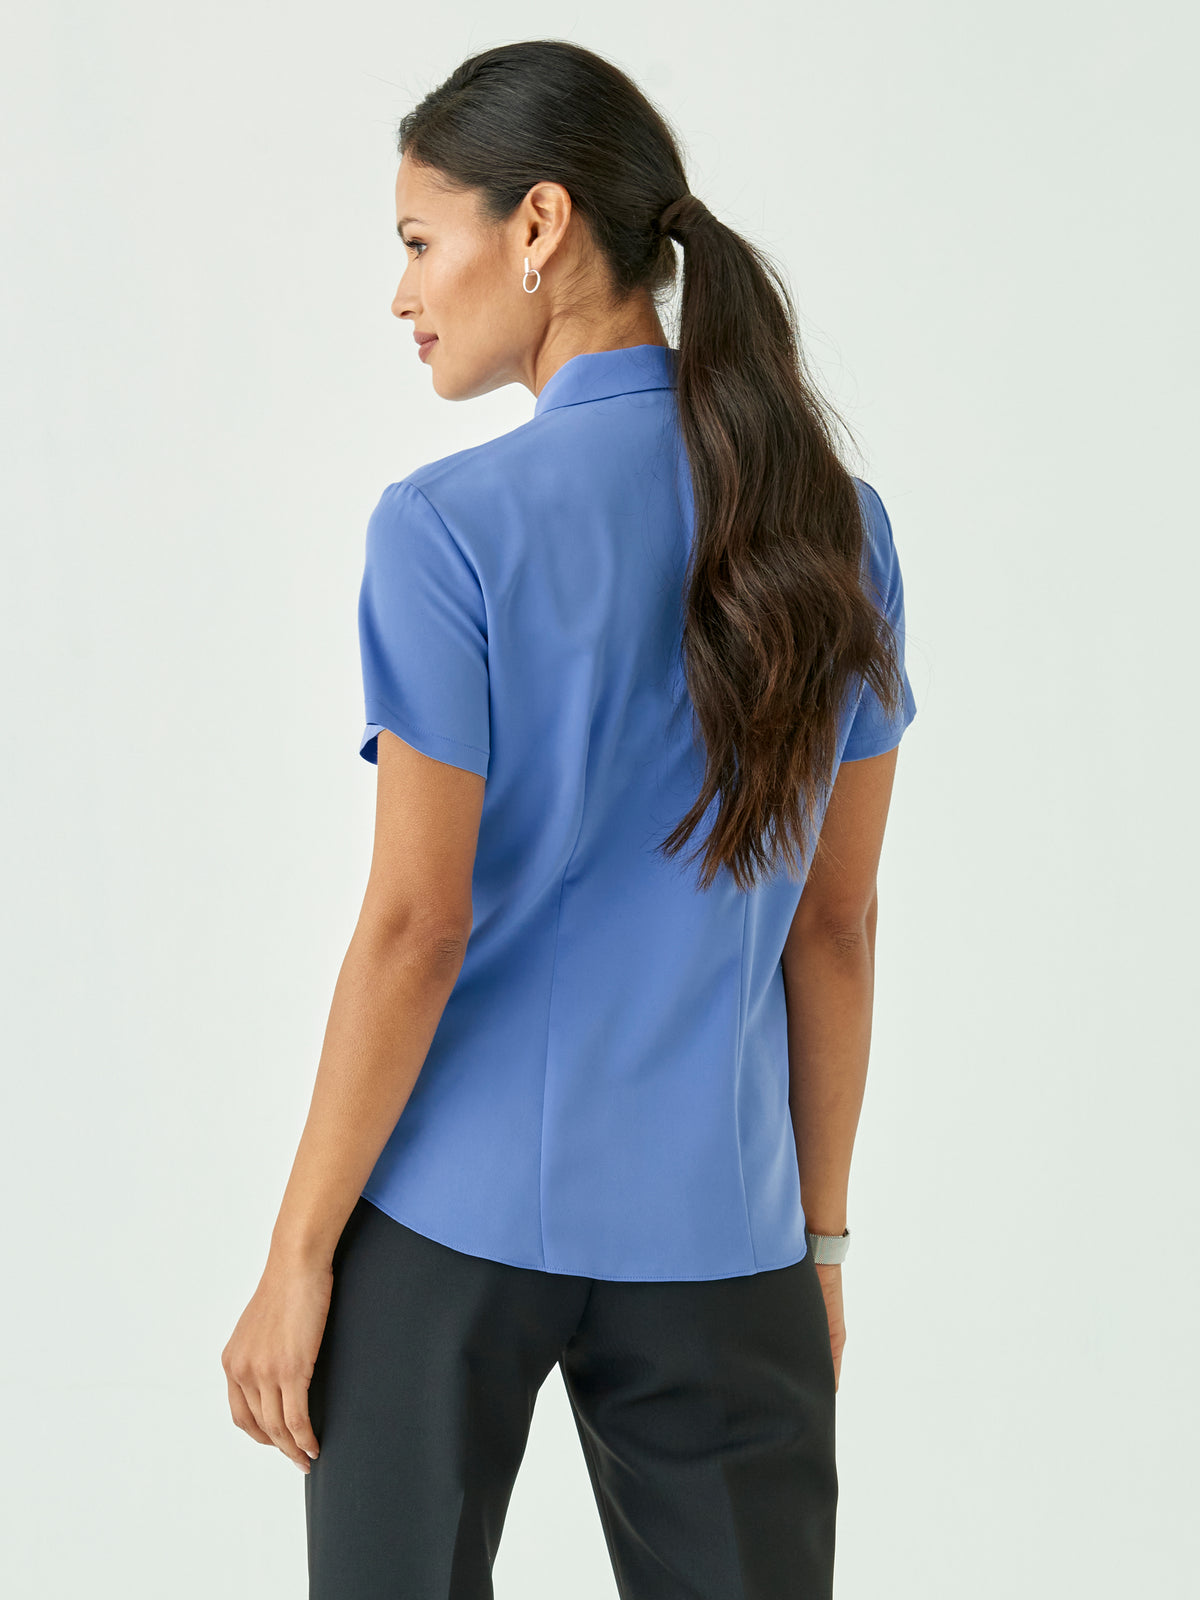 Carrie classic buttoned shirt - blue